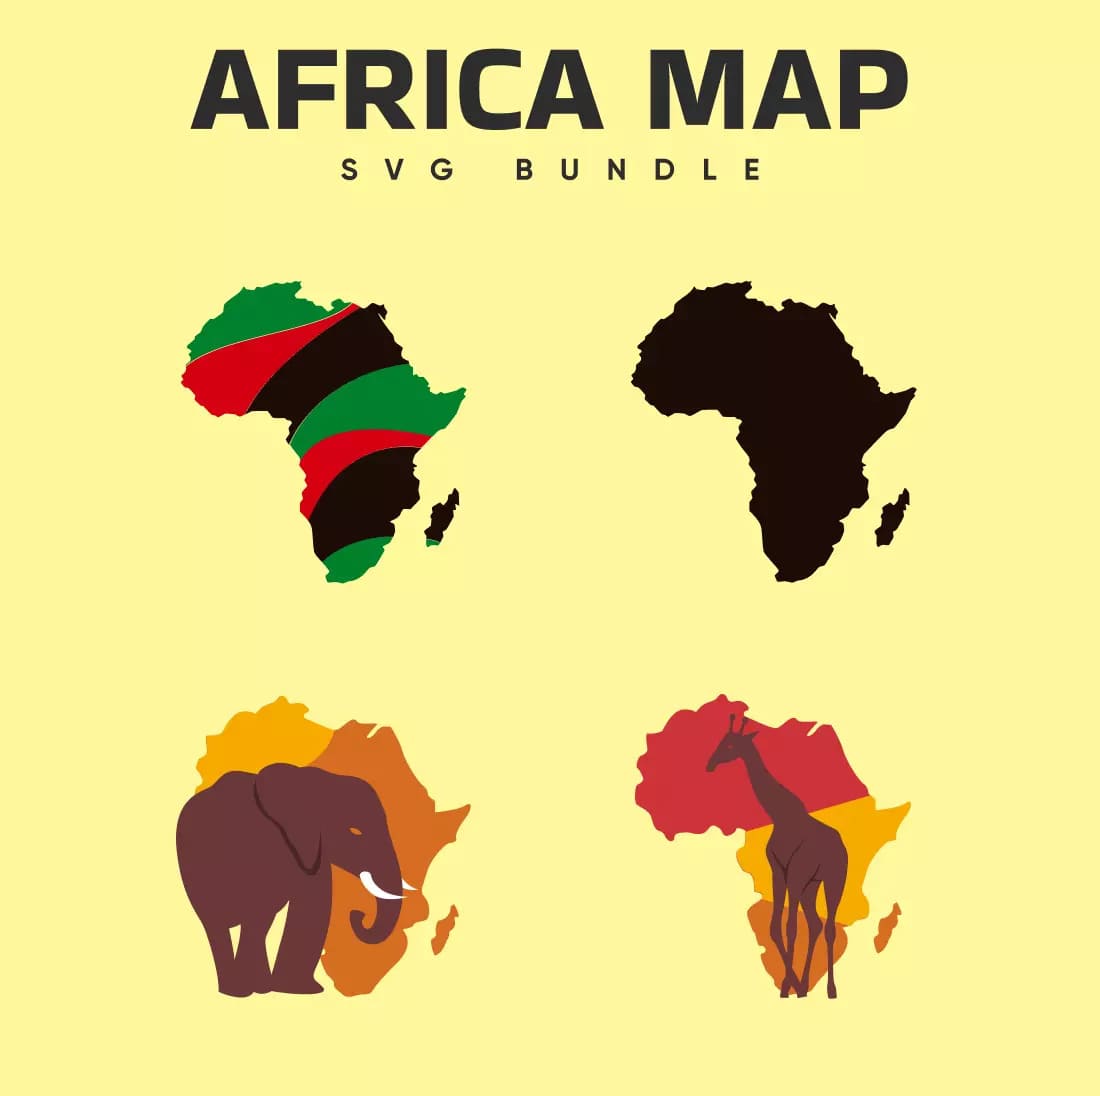 Africa Map SVG Bundle Preview.